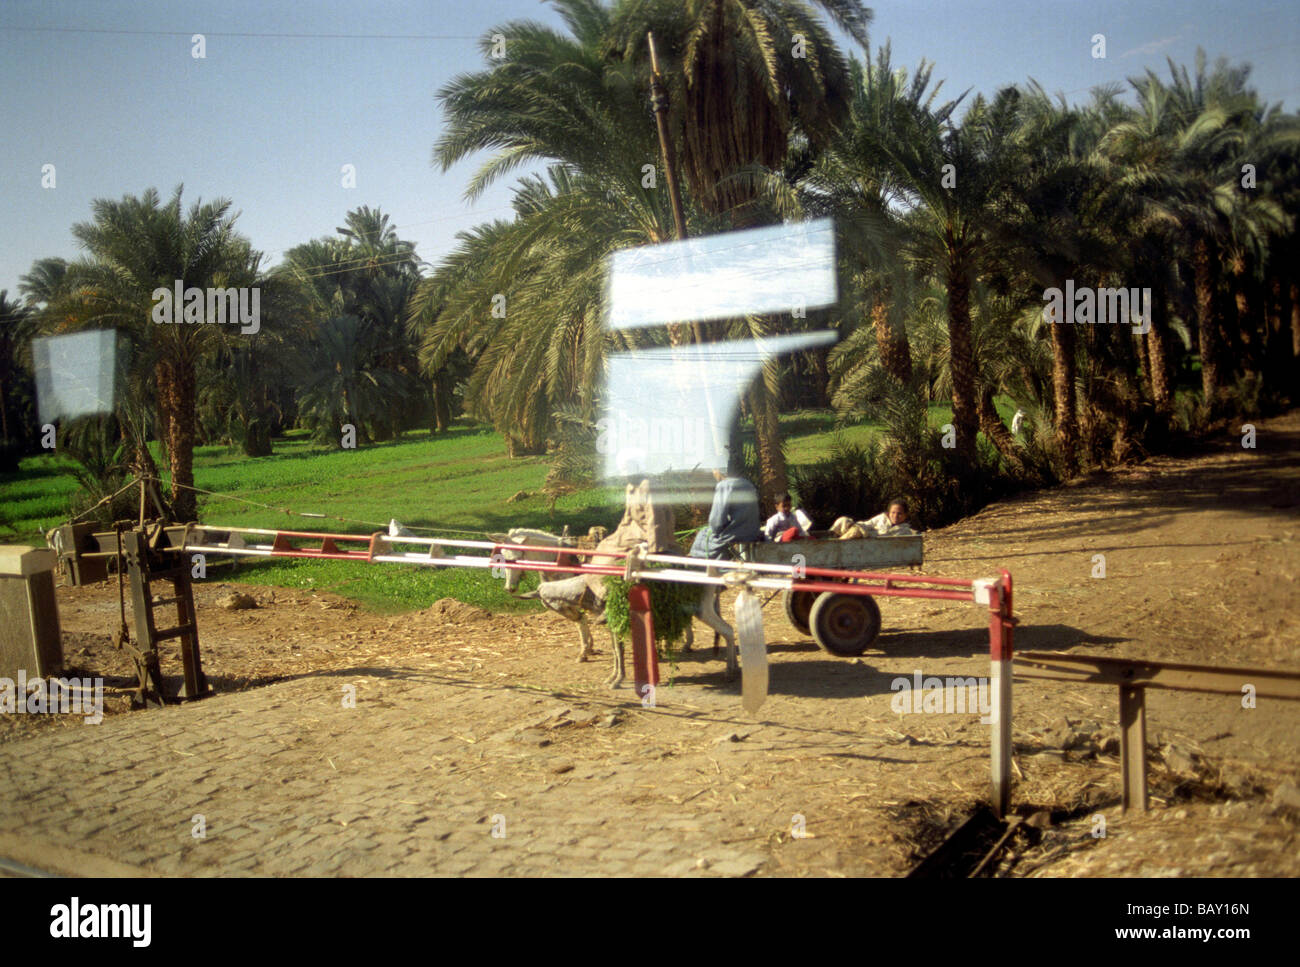 People with horse-drawn cart waiting at a railroad crossing, Luxor, Egypt Stock Photo